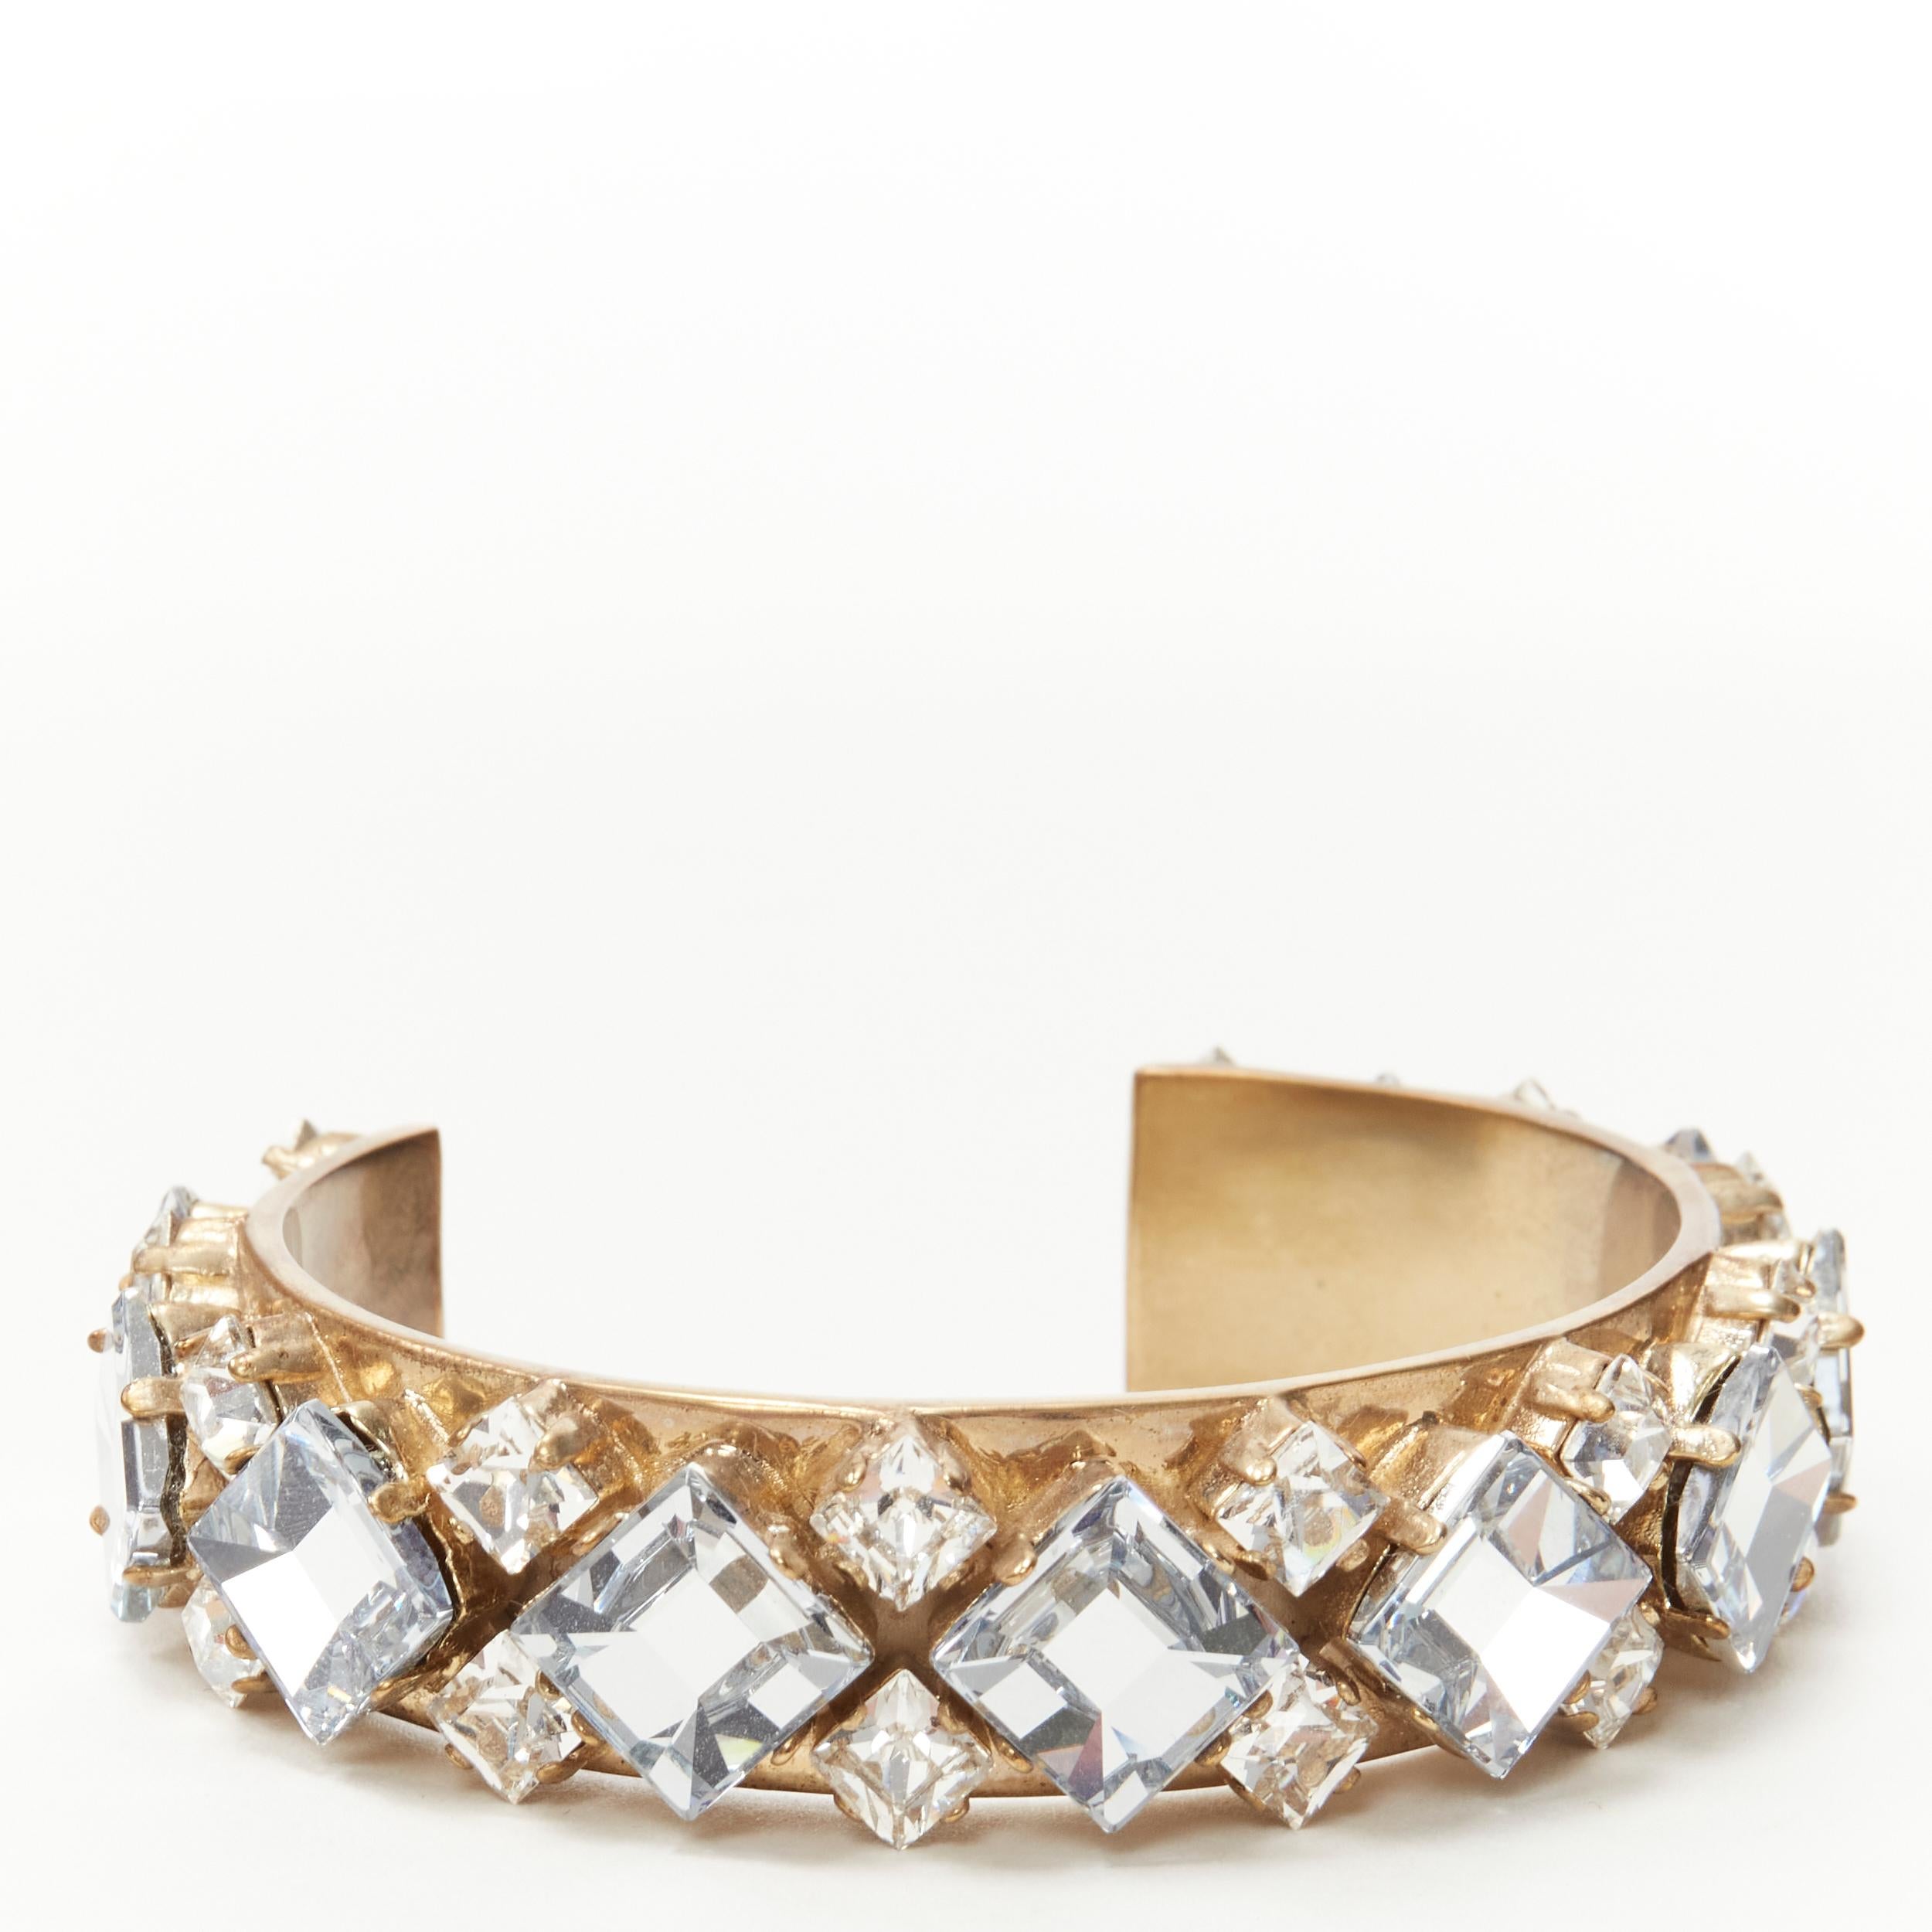 CHRISTIAN DIOR light blue clear square crystal jewel gold-tone cuff bangle M 
Reference: KEDG/A00009 
Brand: Christian Dior 
Material: Metal 
Color: Gold 
Extra Detail: Metal was designed to be pre-oxidized for an antique brushed finishing. Blue and